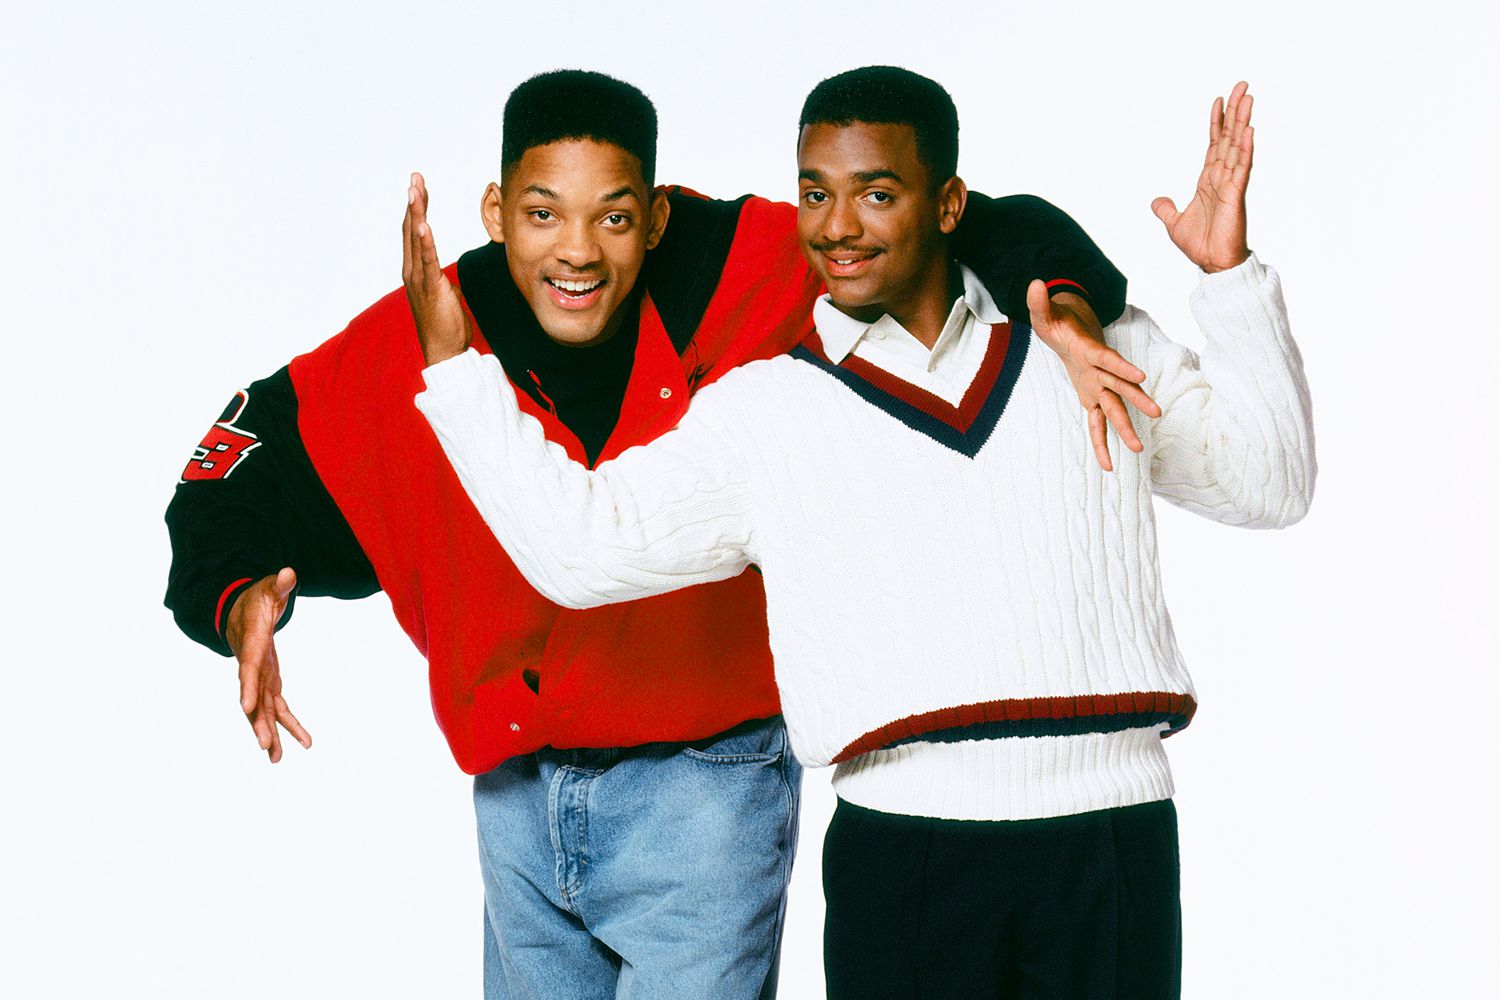 the fresh prince of bel air reunion movie